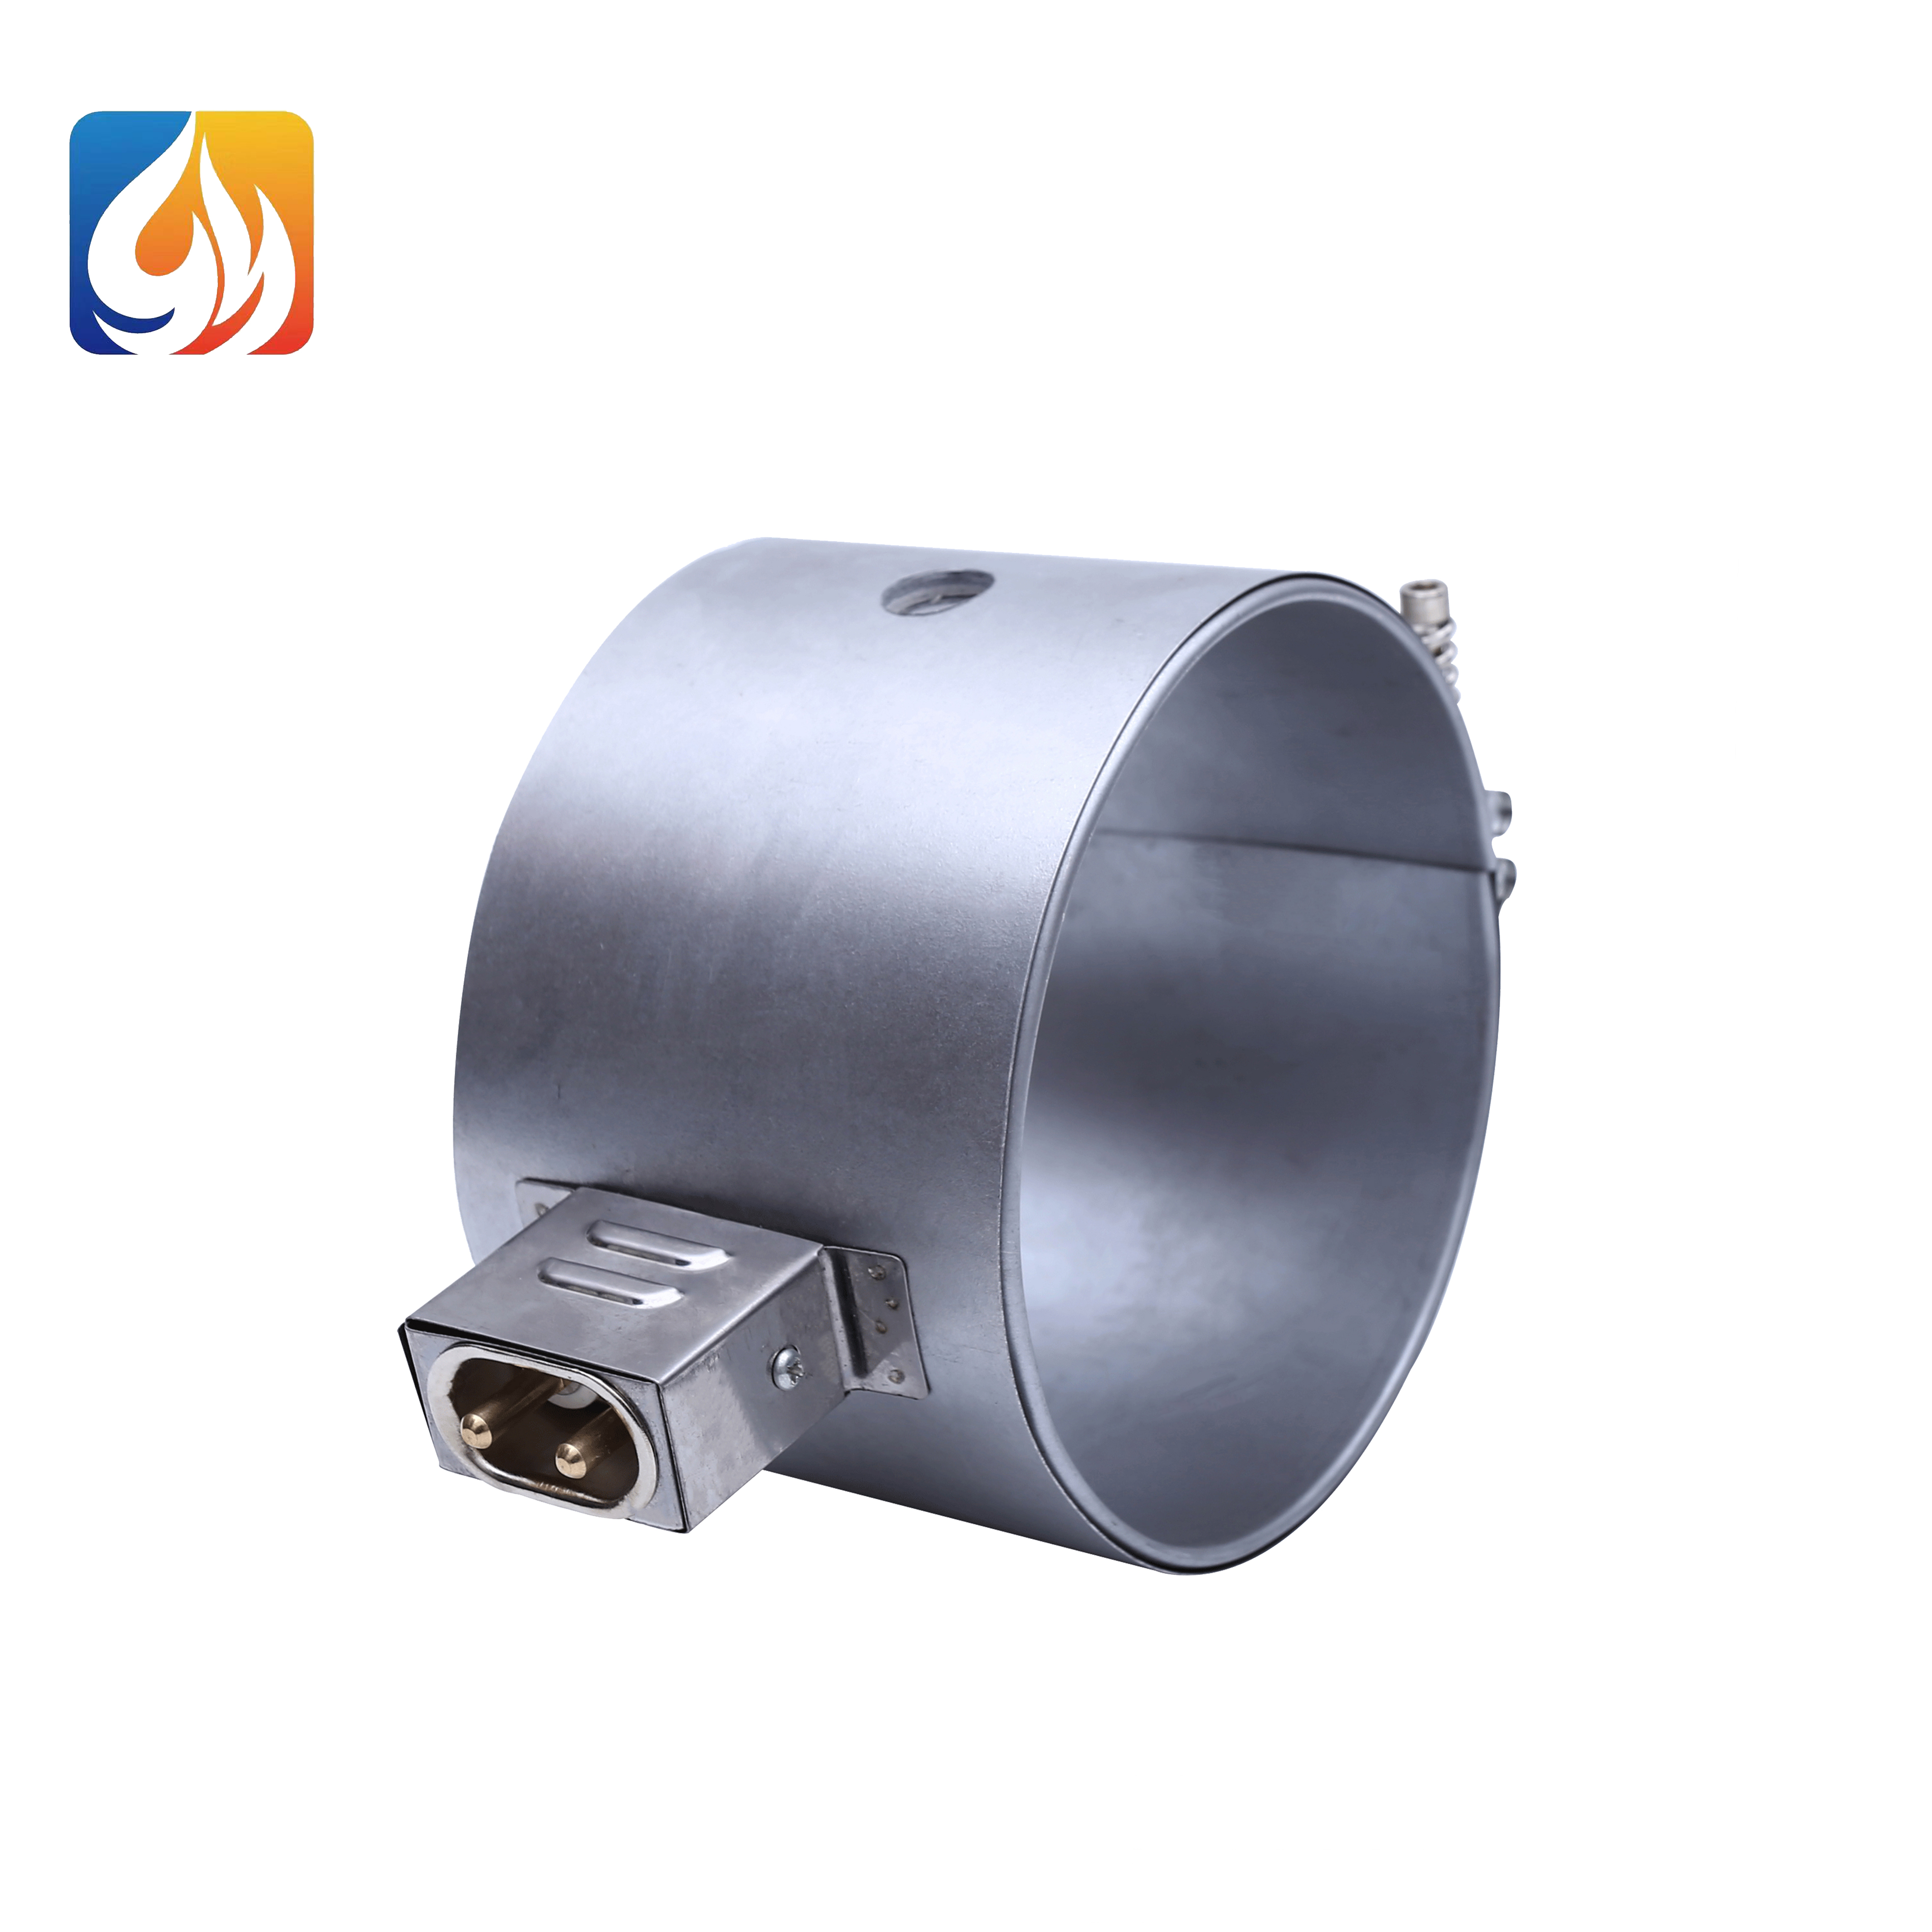 Mica band heater uses